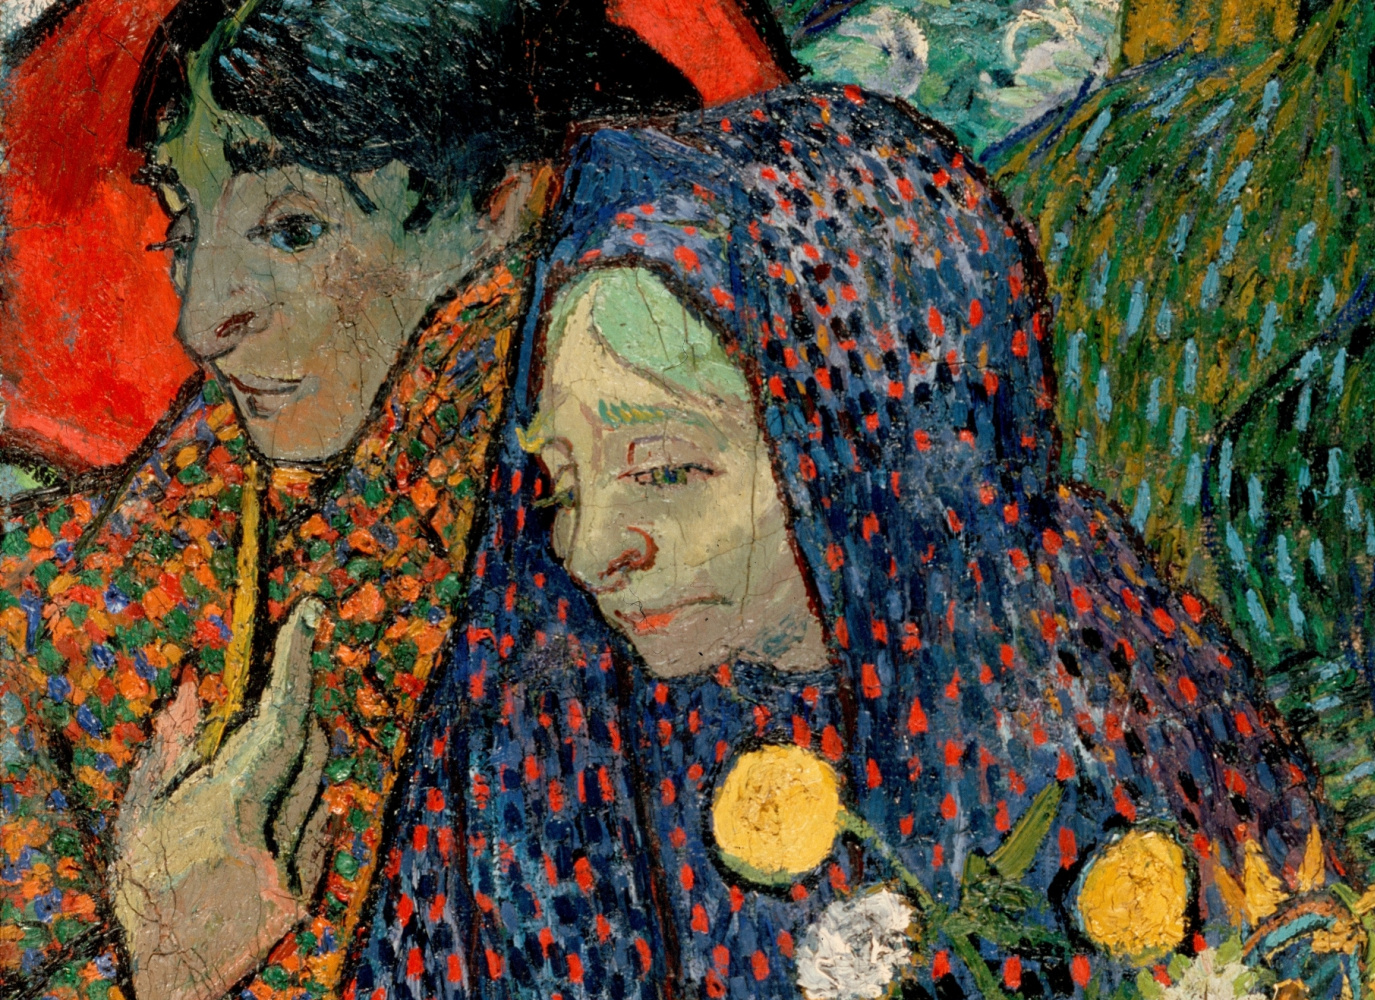 How Van Gogh paid for the care of his mentally ill sister after his death